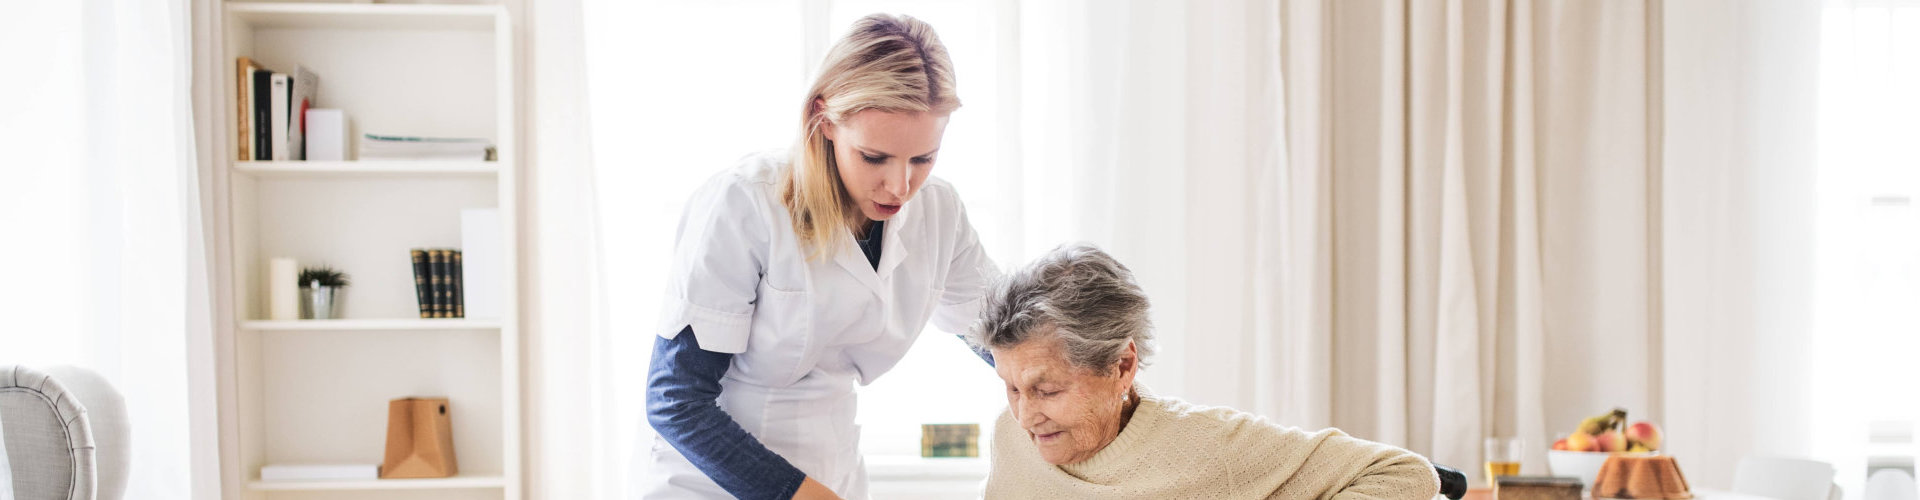 caregiver assisted to her old woman patient